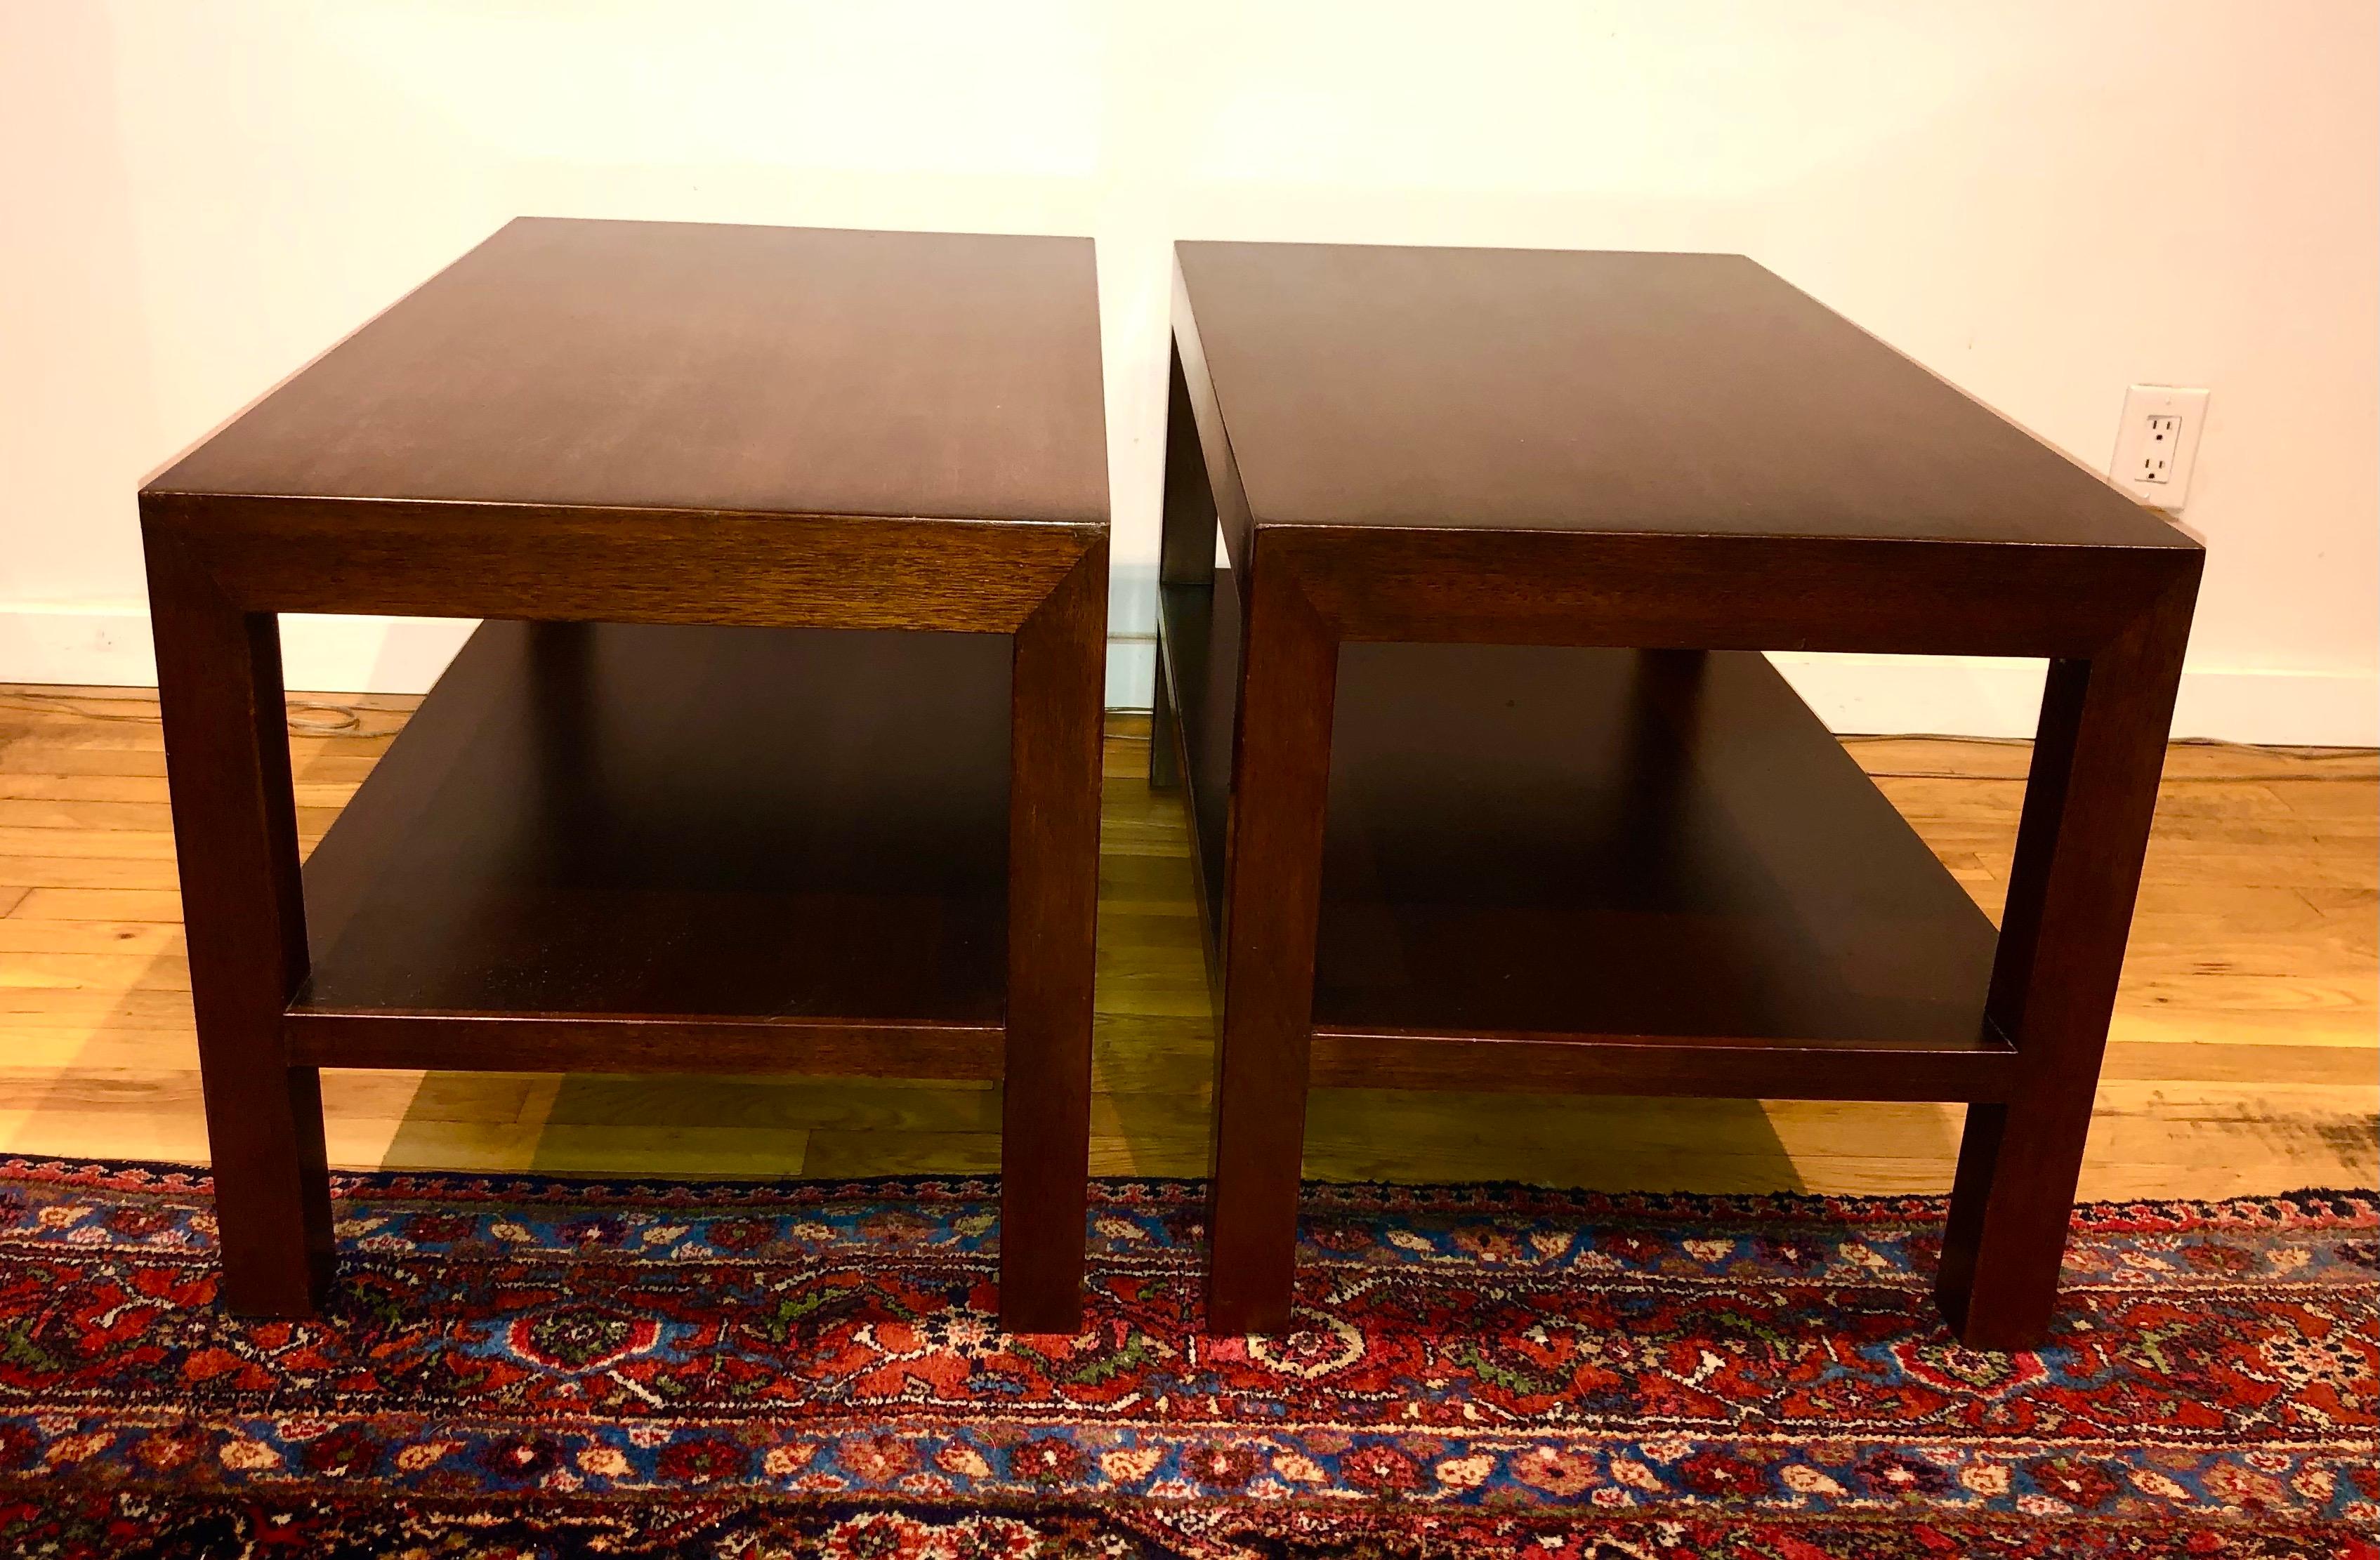 Simple, perfectly proportioned two-tiered walnut side tables, designed by Edward Wormley. Model 4533 from 1945. Both tables retain paper labels and Dunbar brand.